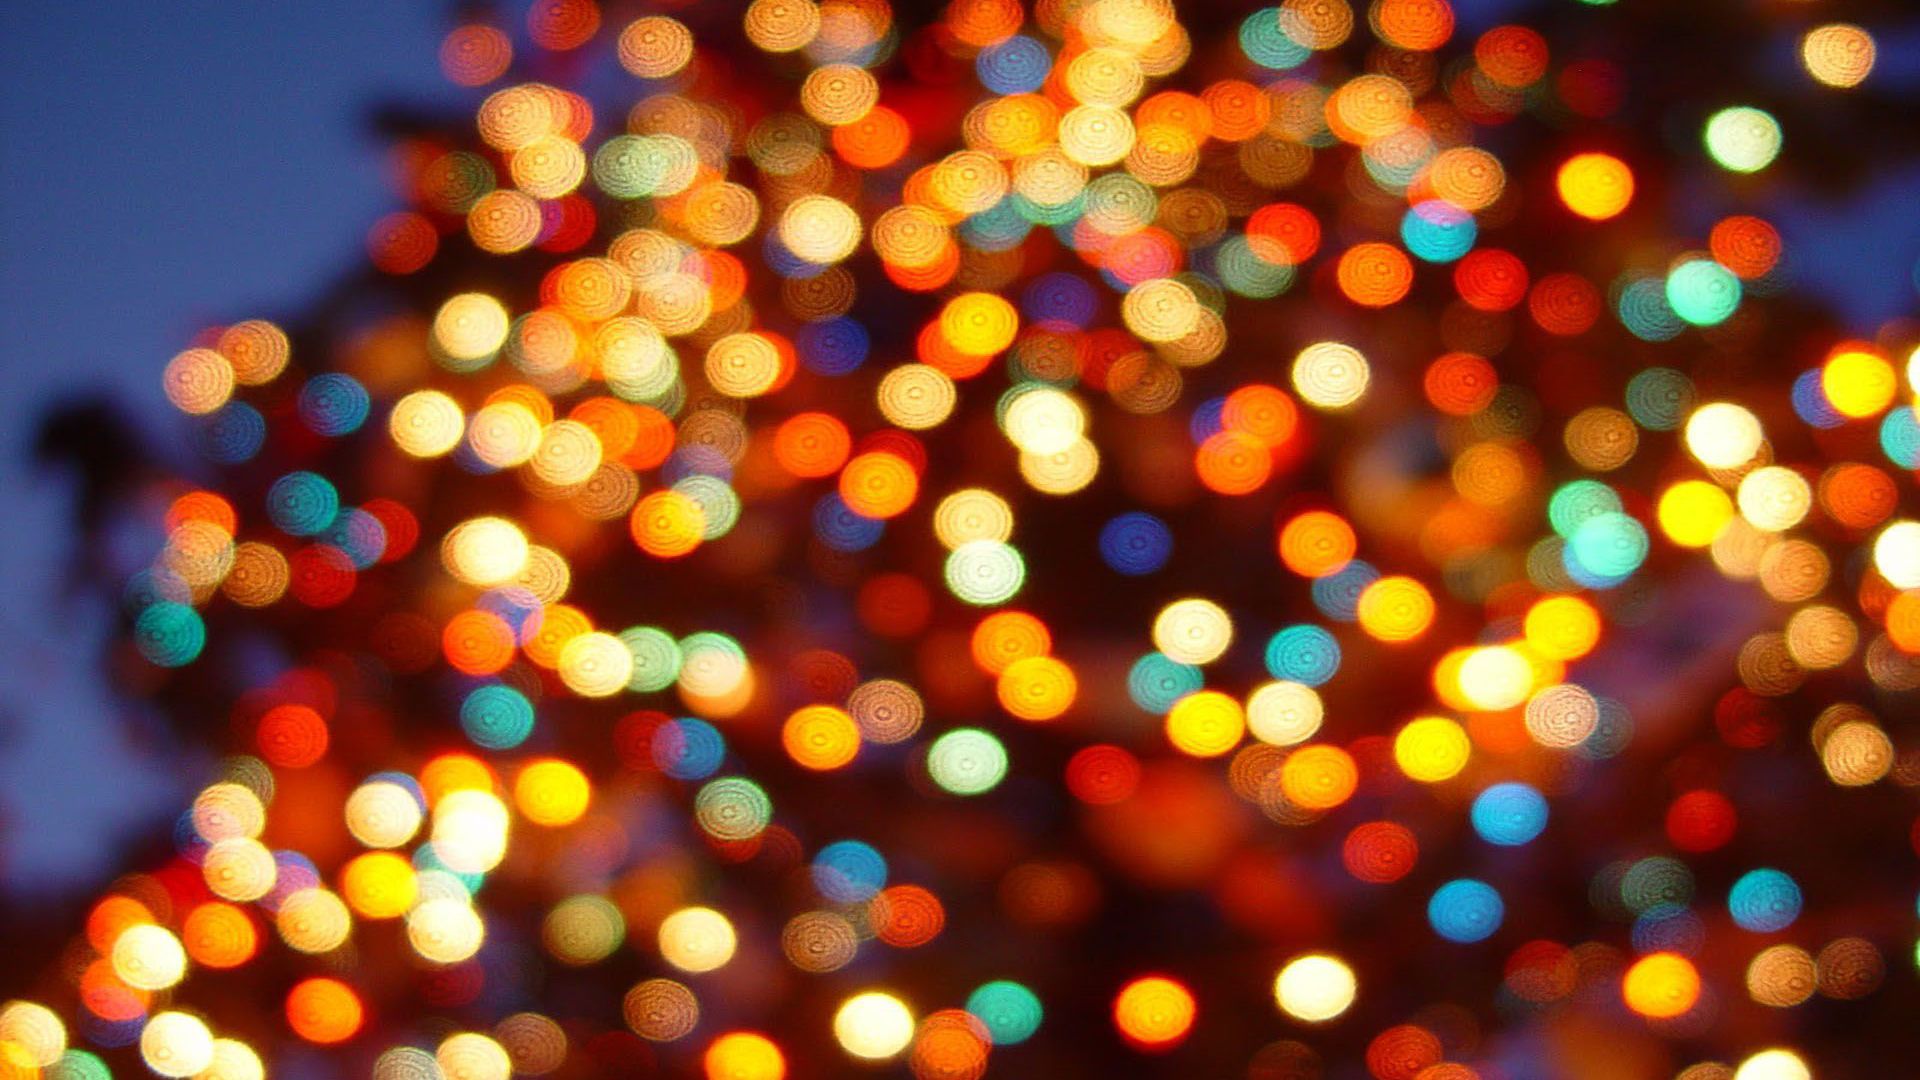 Aesthetic Christmas Lights Wallpaper HD for PC Free Download